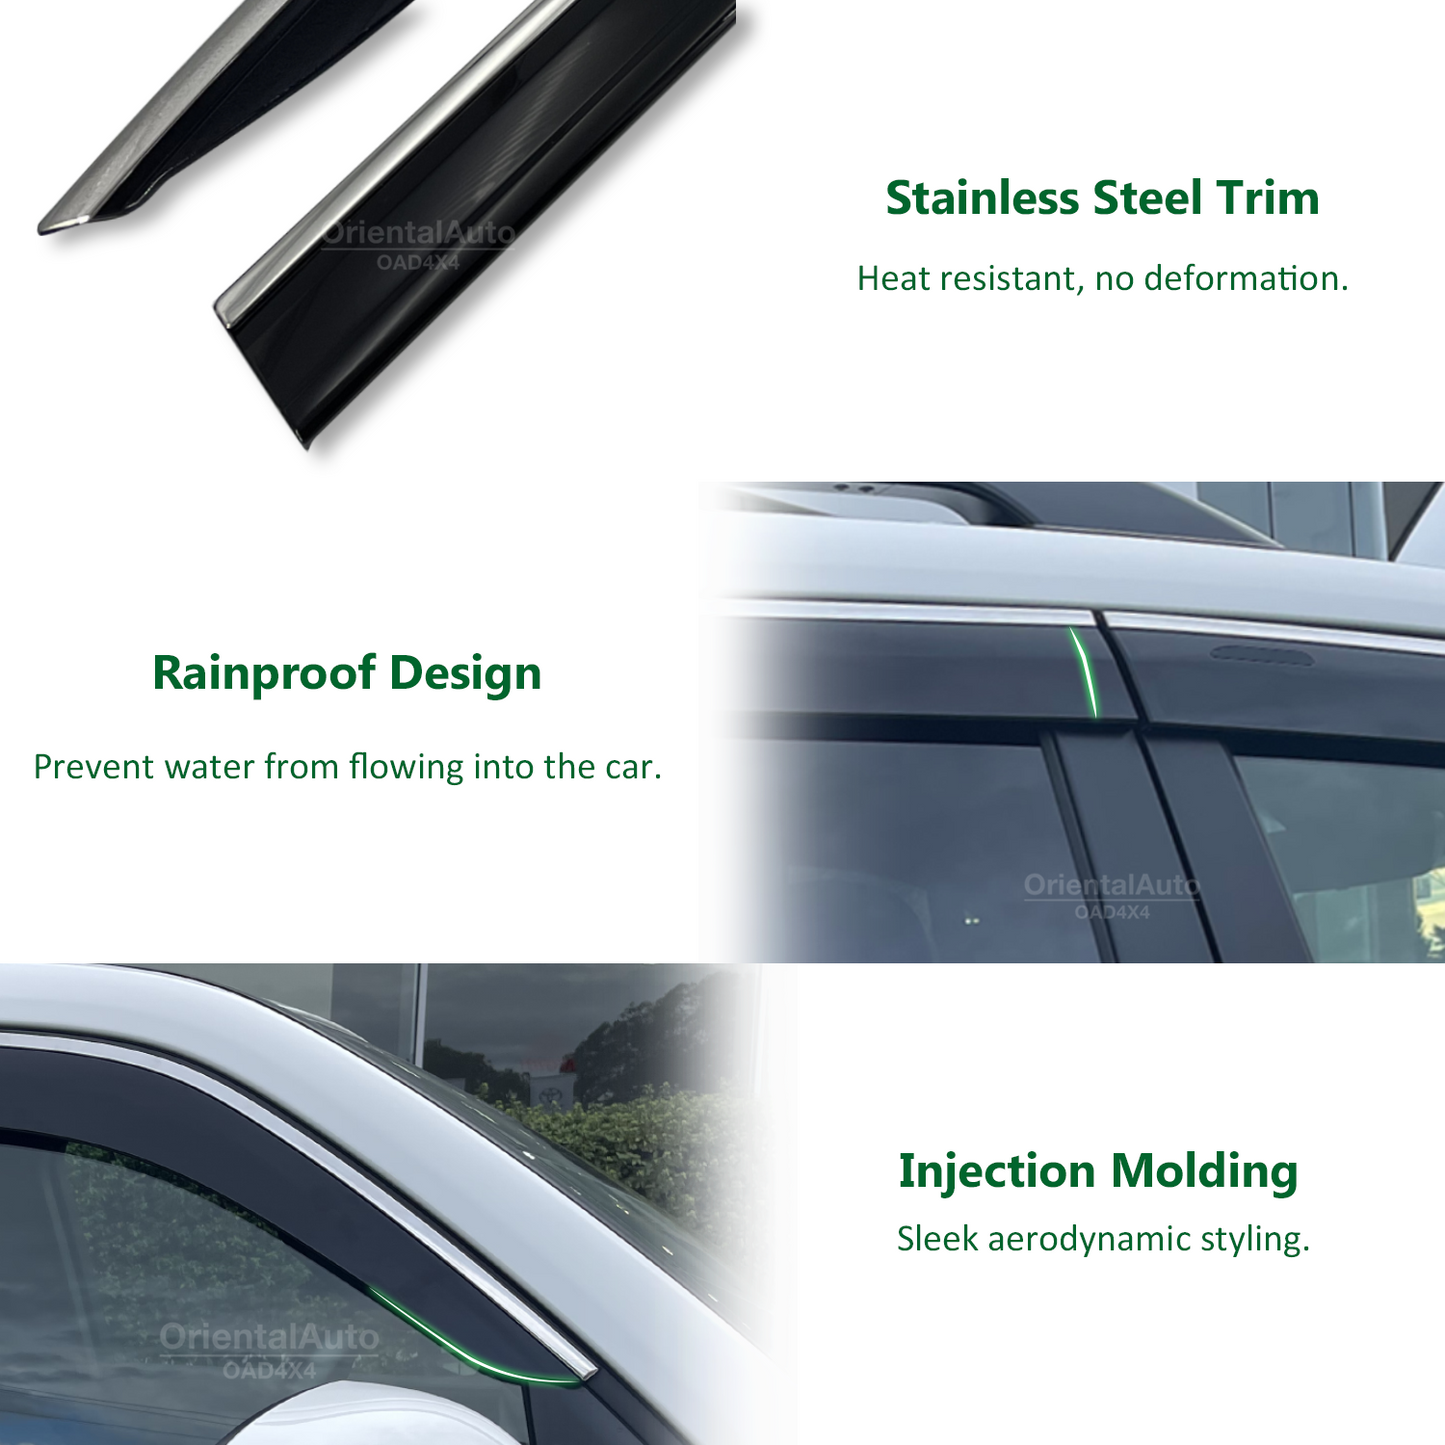 Injection Stainless Weathershields for Toyota Aurion 2012-2017 Weather Shields Window Visor